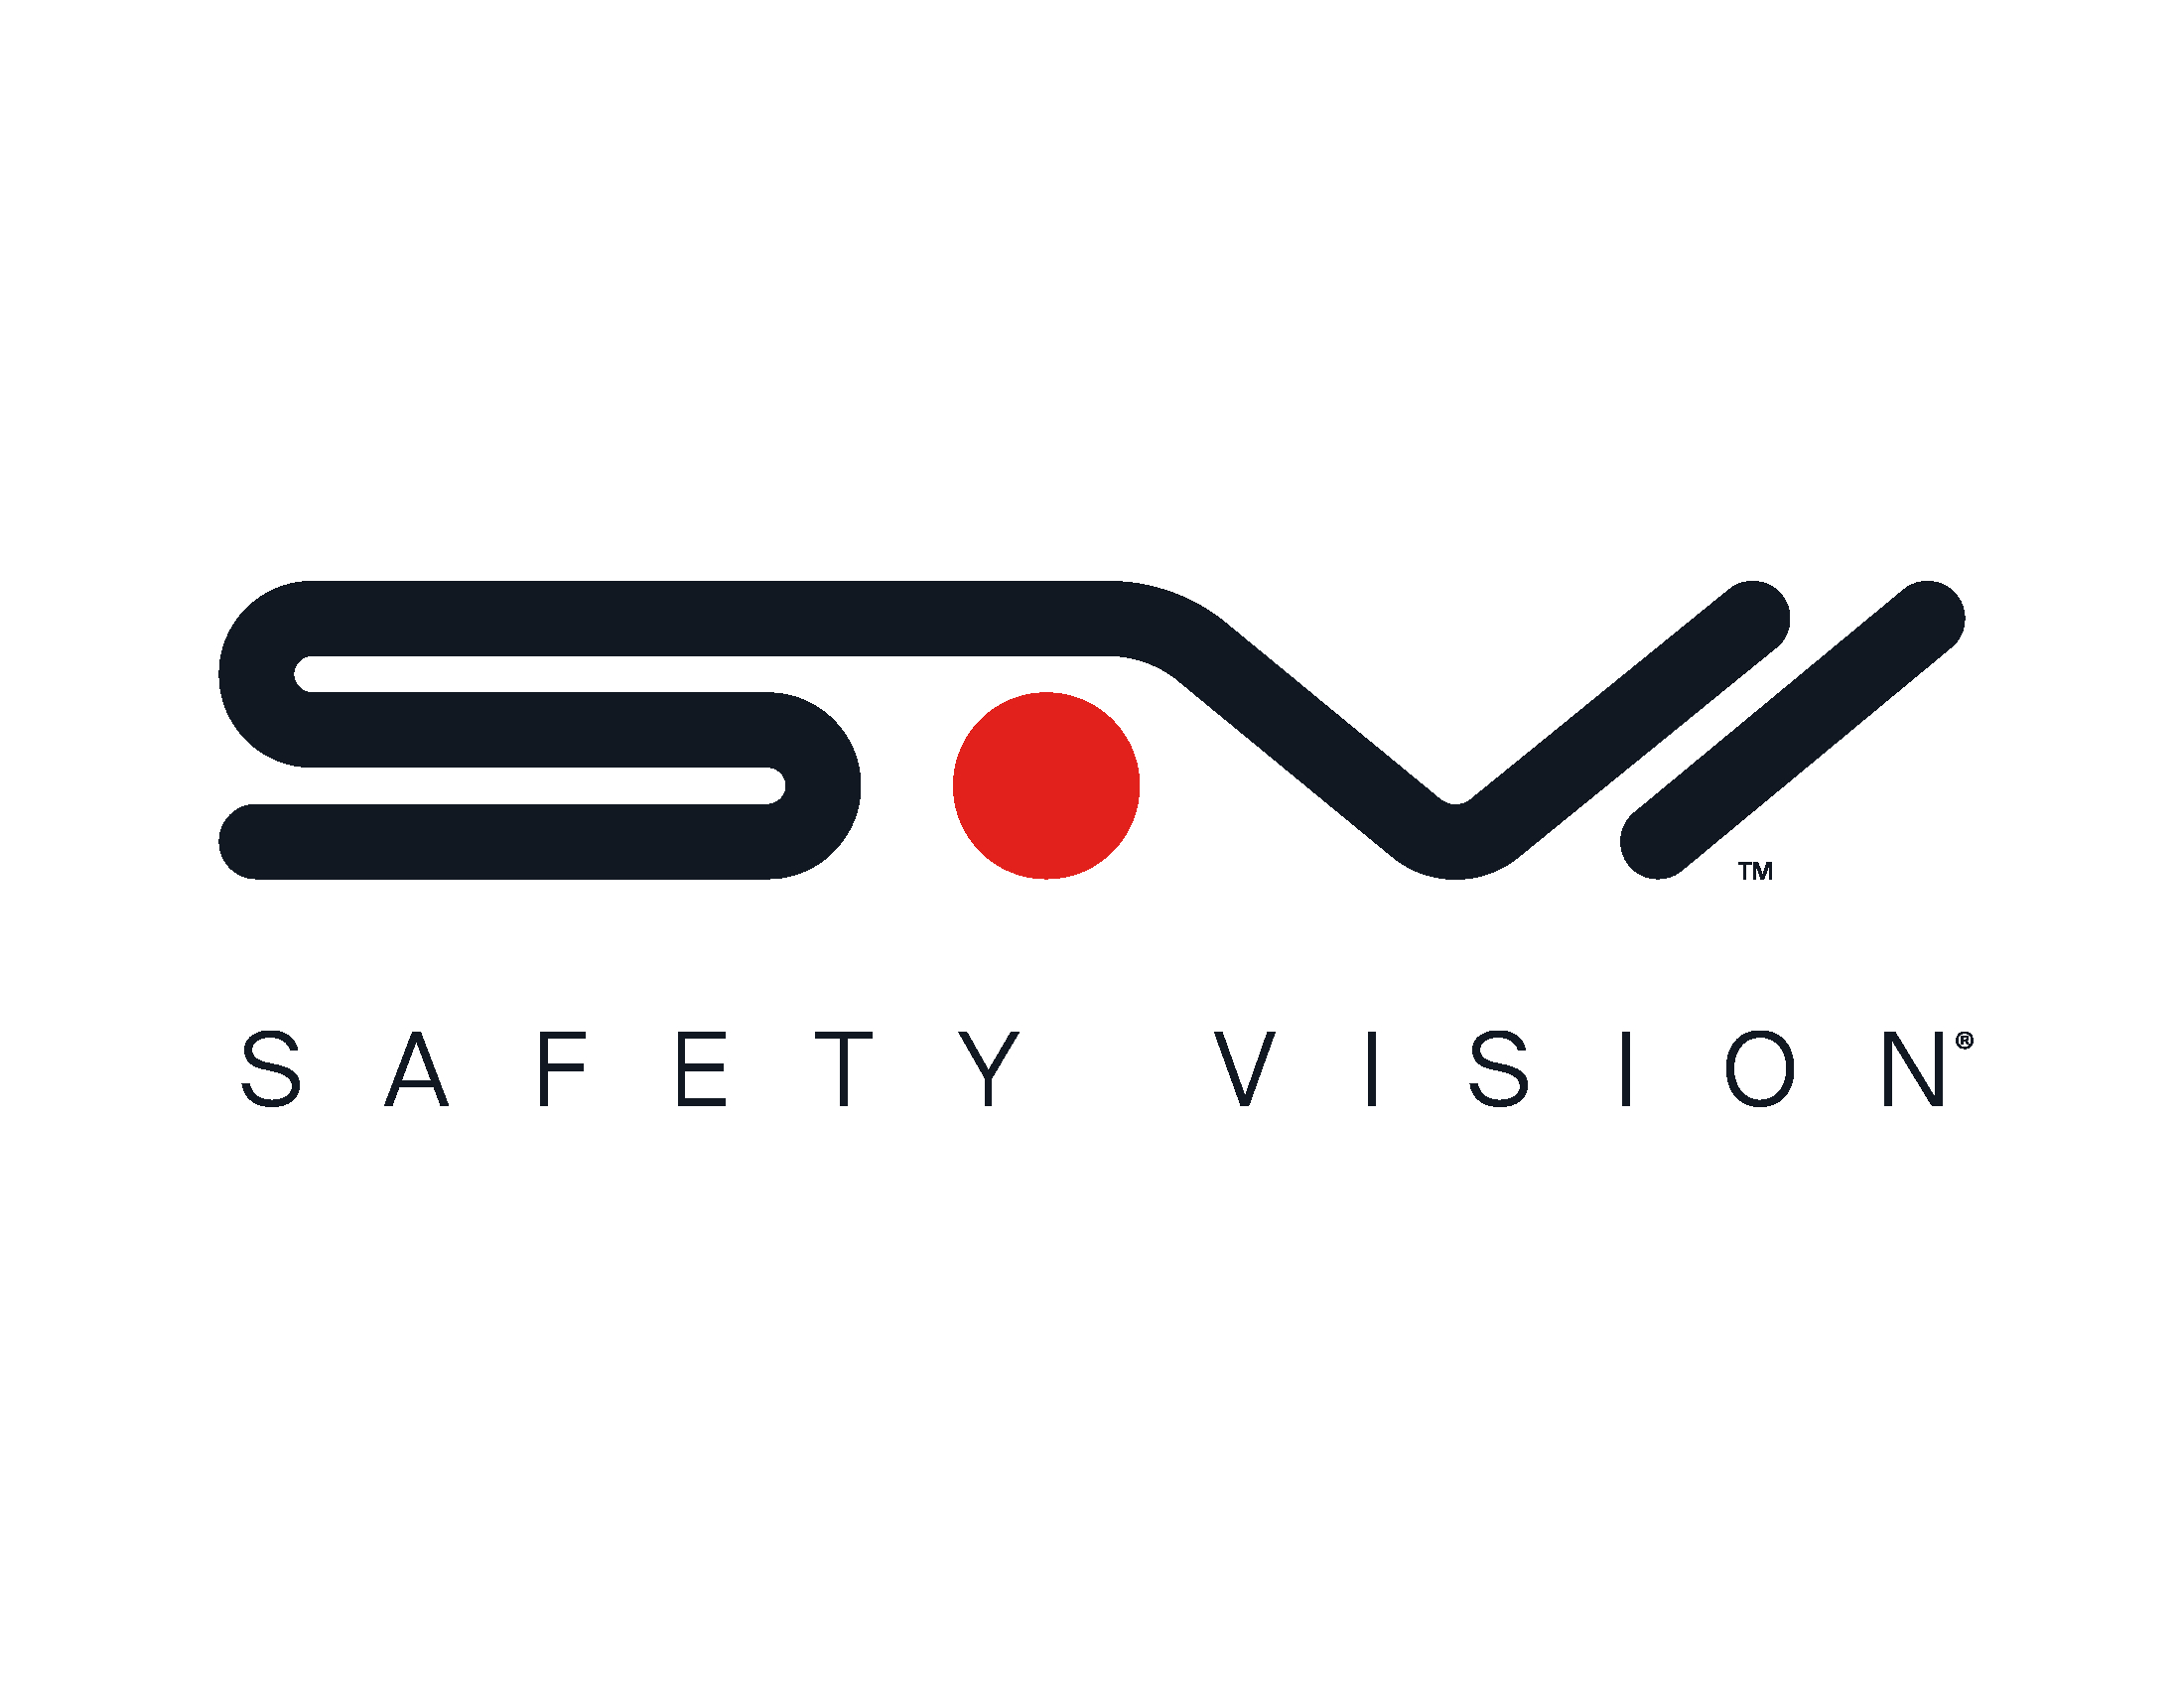 Safety Vision (from website)